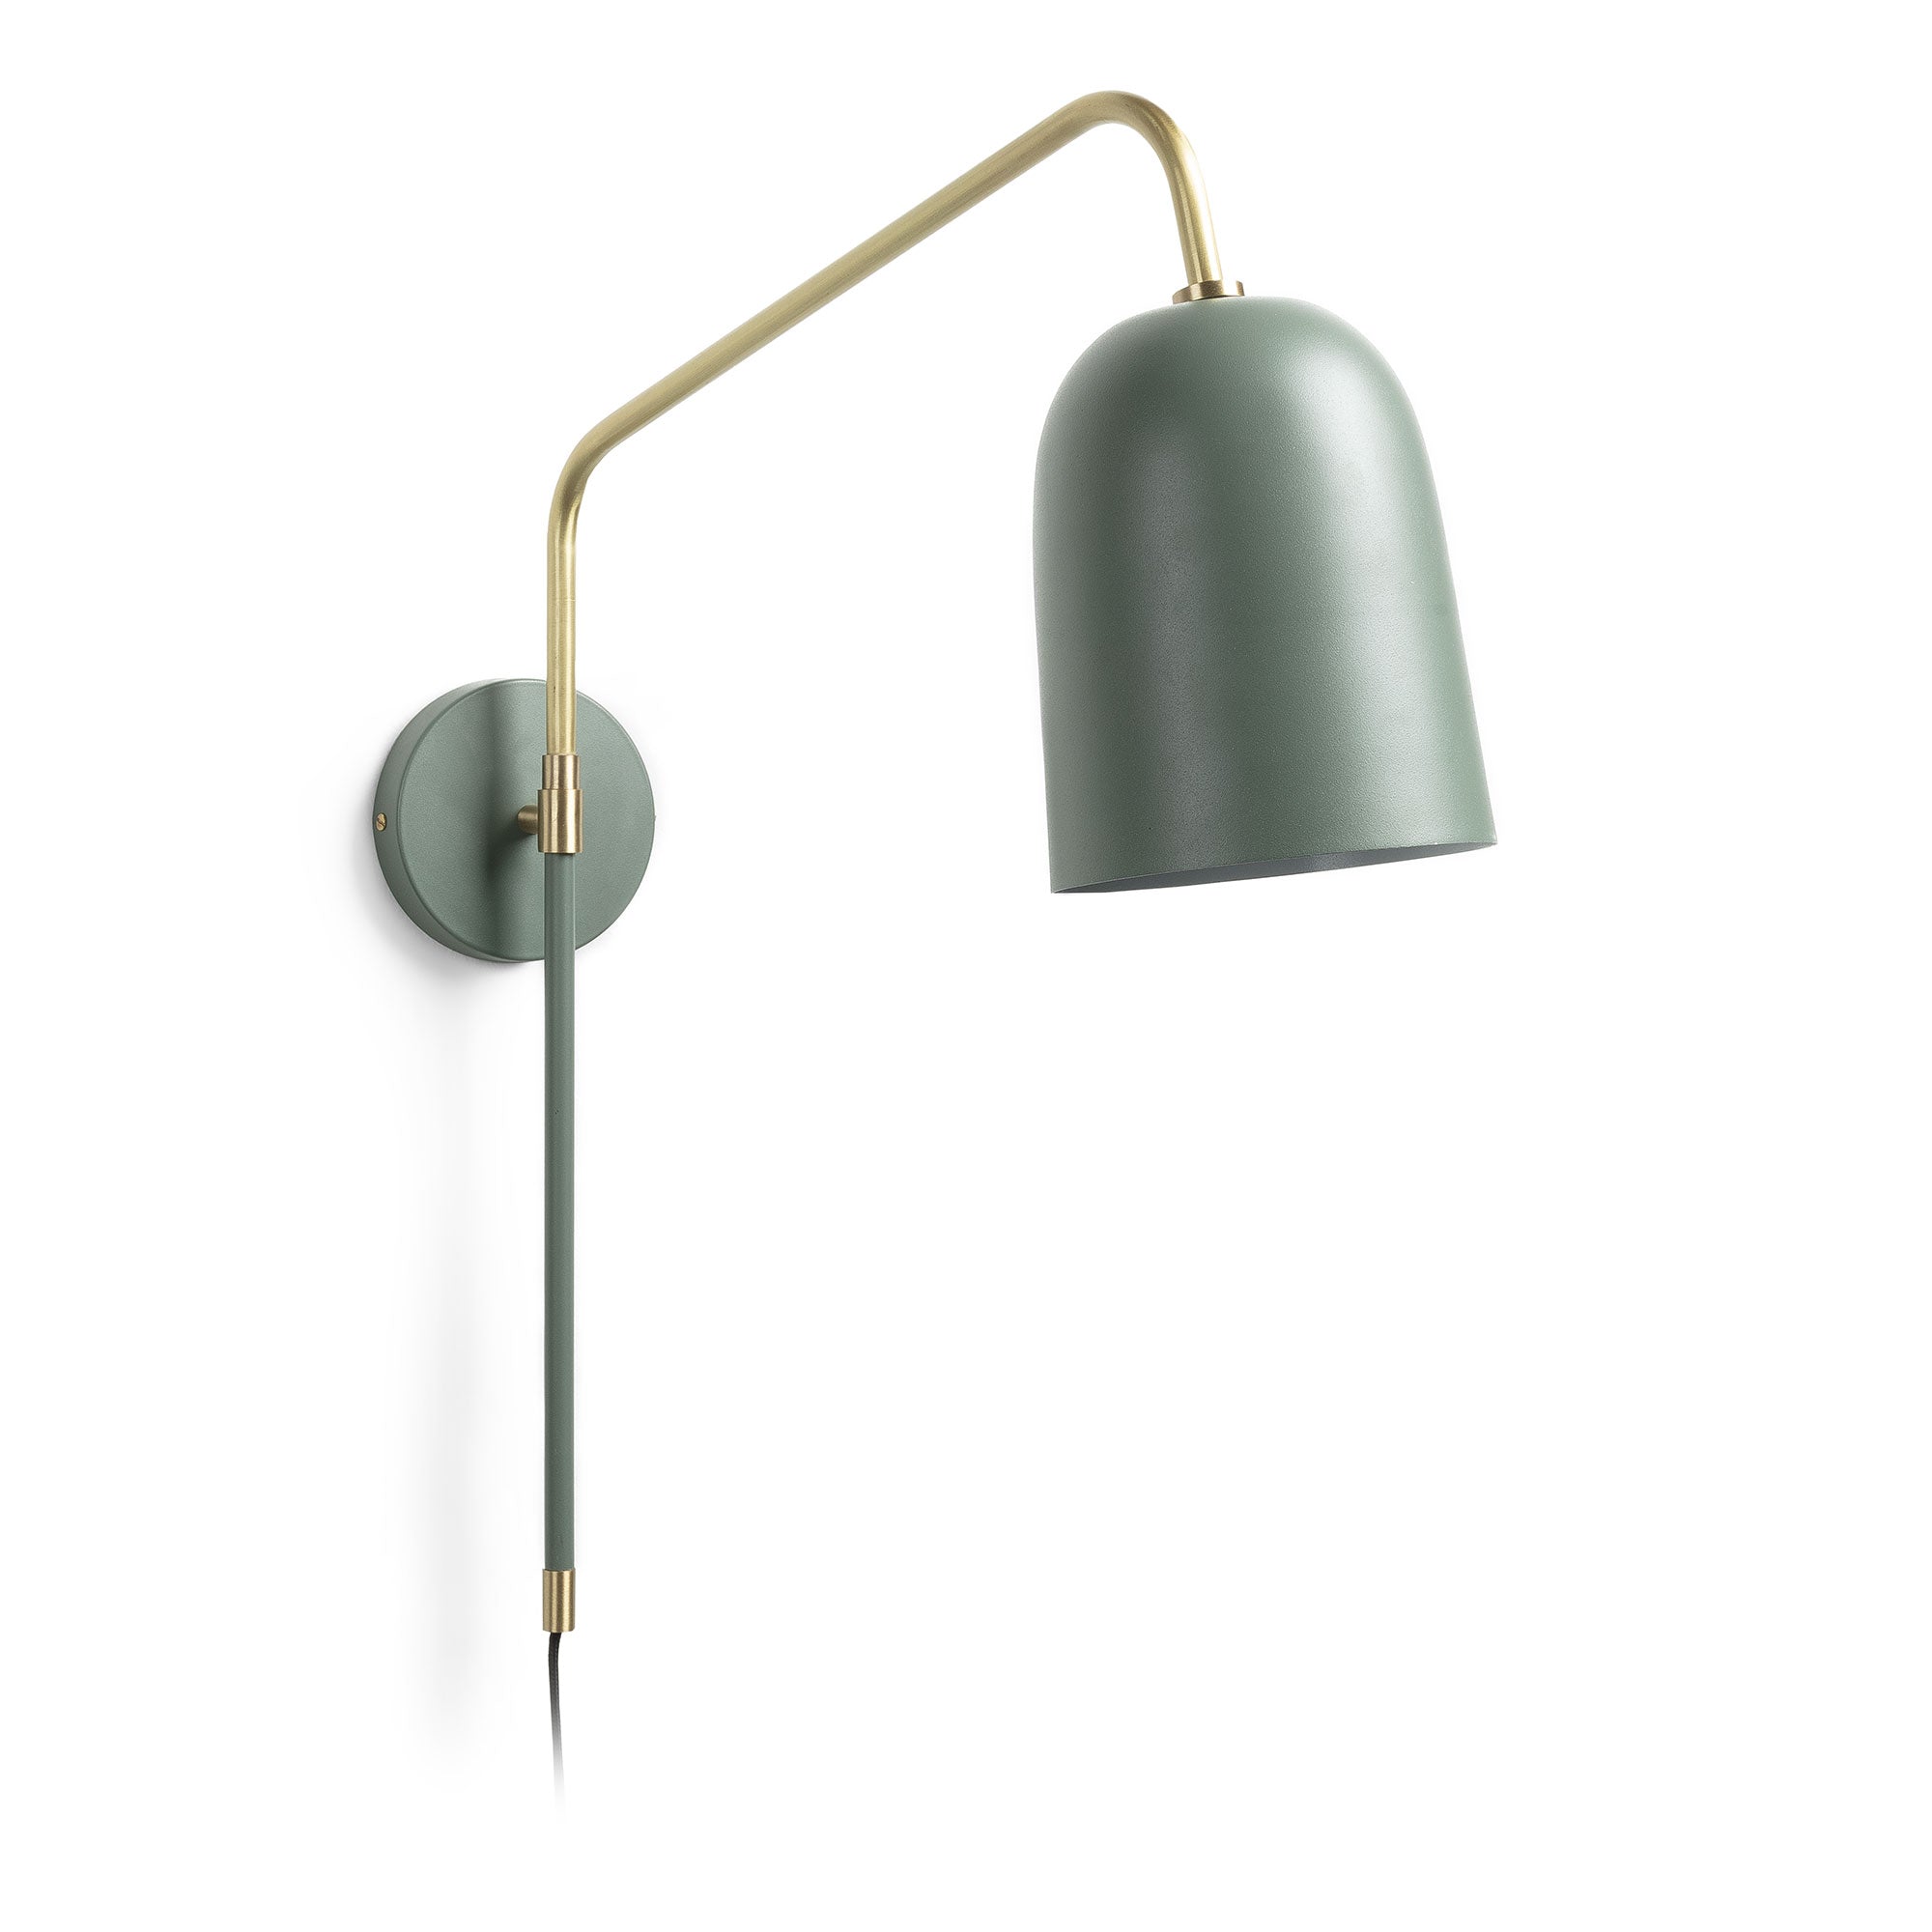 Audrie wall light in steel with green painted finish